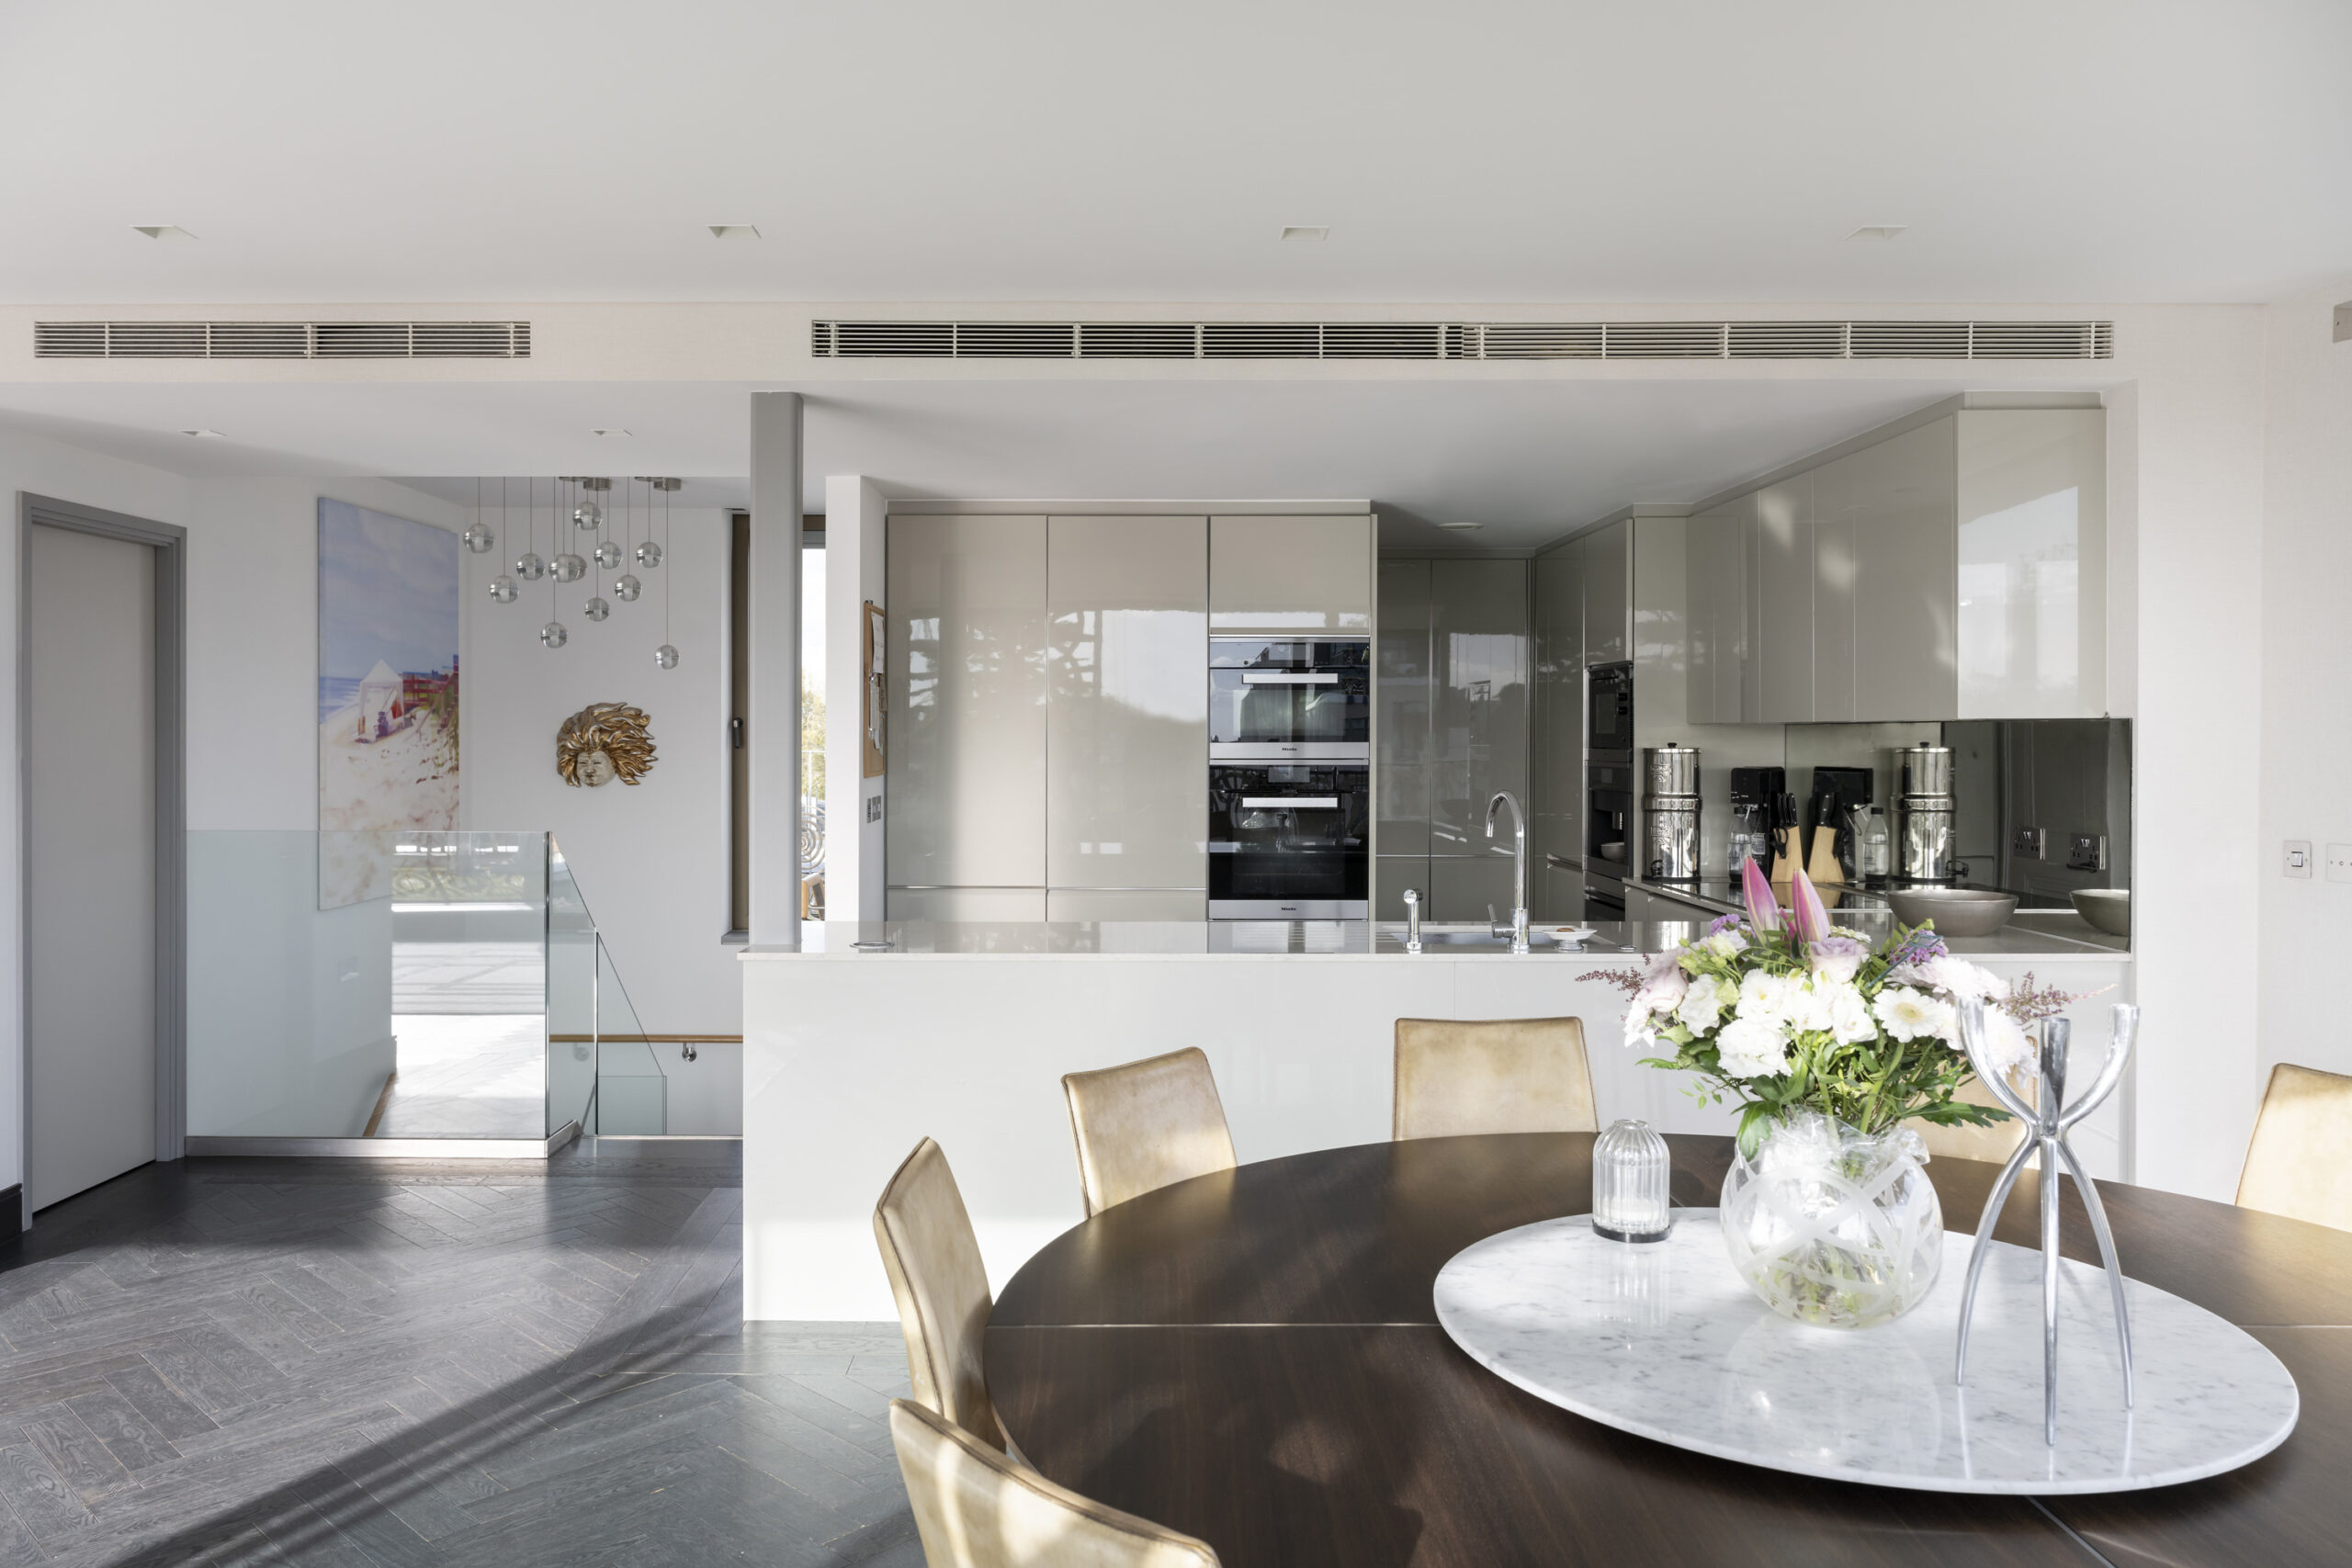 Modern kitchen and dining area of a luxury penthouse apartment for sale on Westbourne Grove